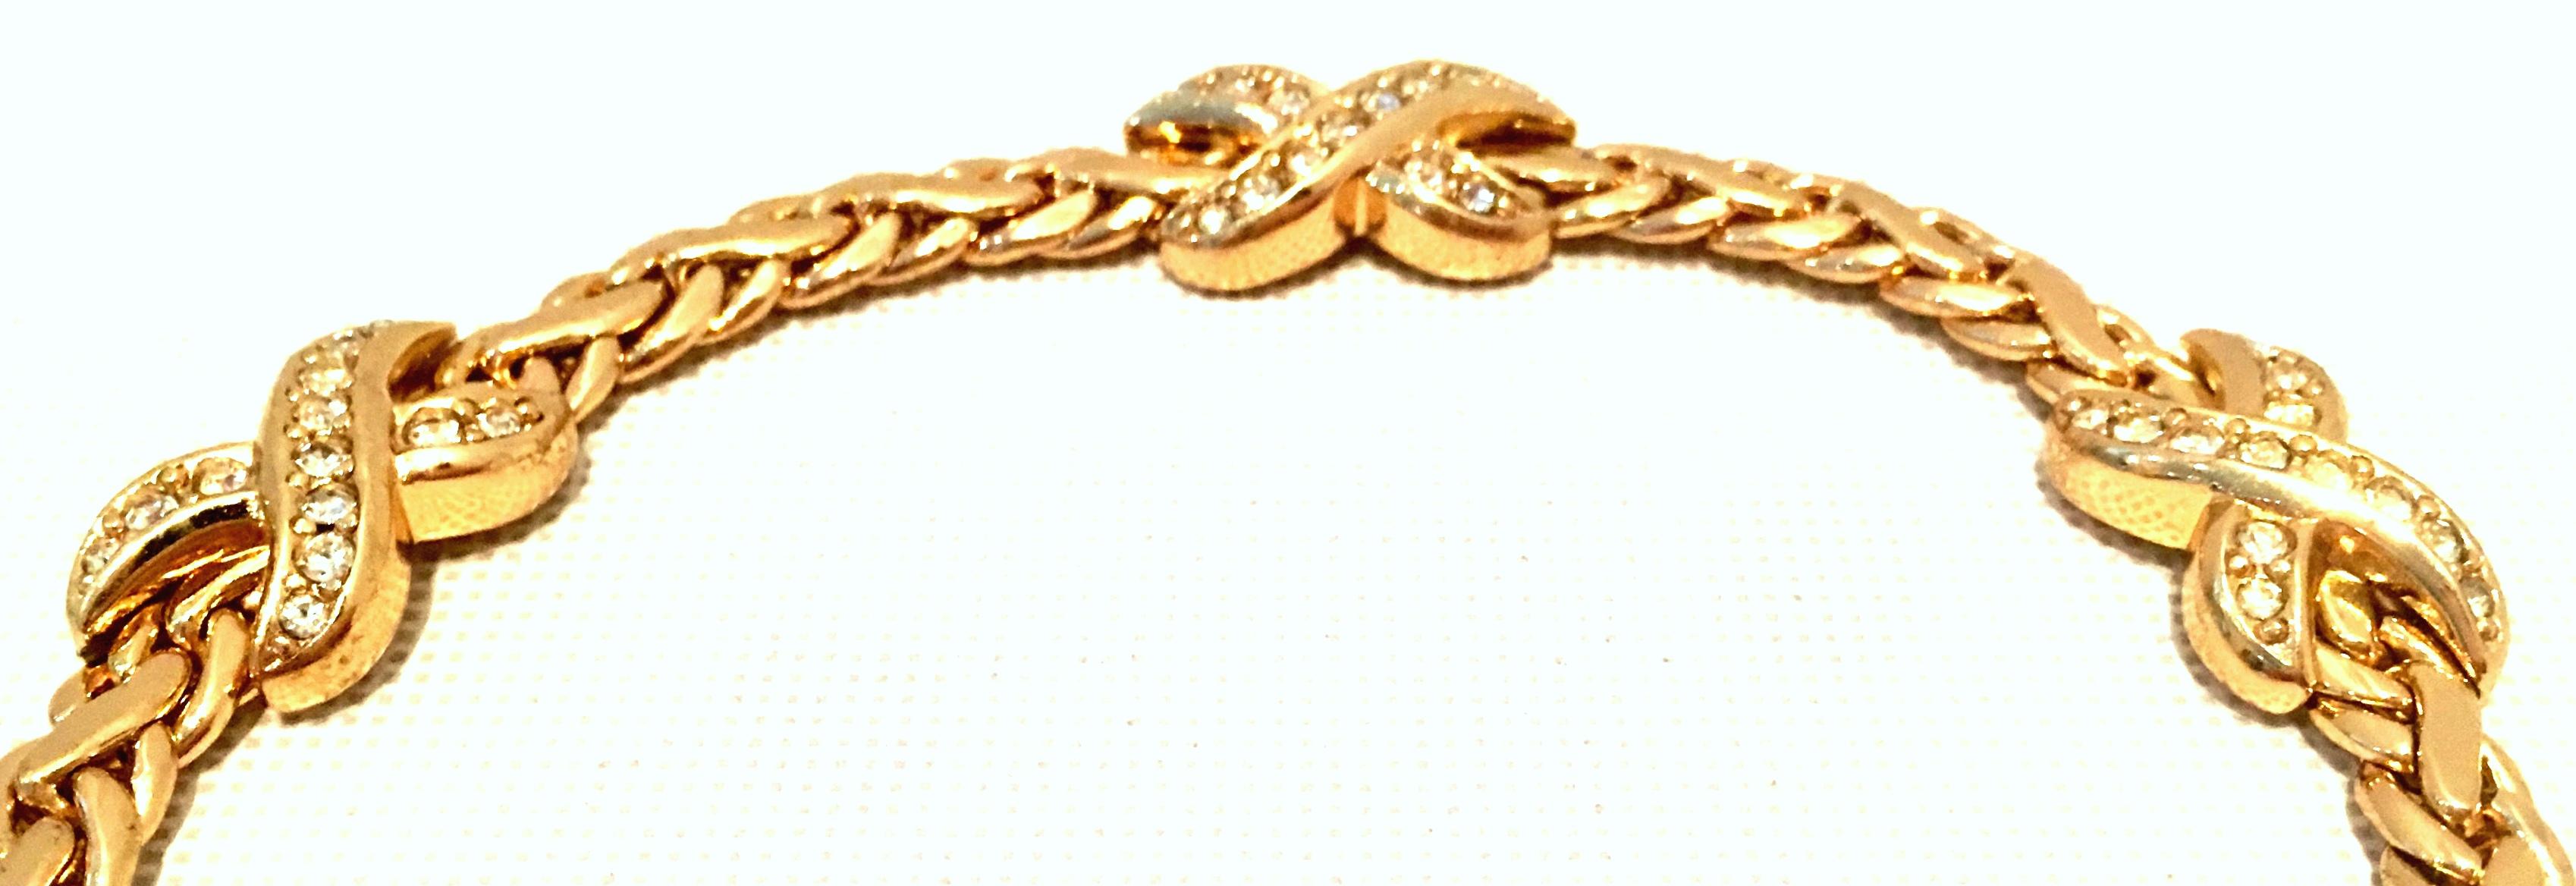 20th Century Gold & Swaorovski Crystal Choker Style Necklace By, Christian Dior 4